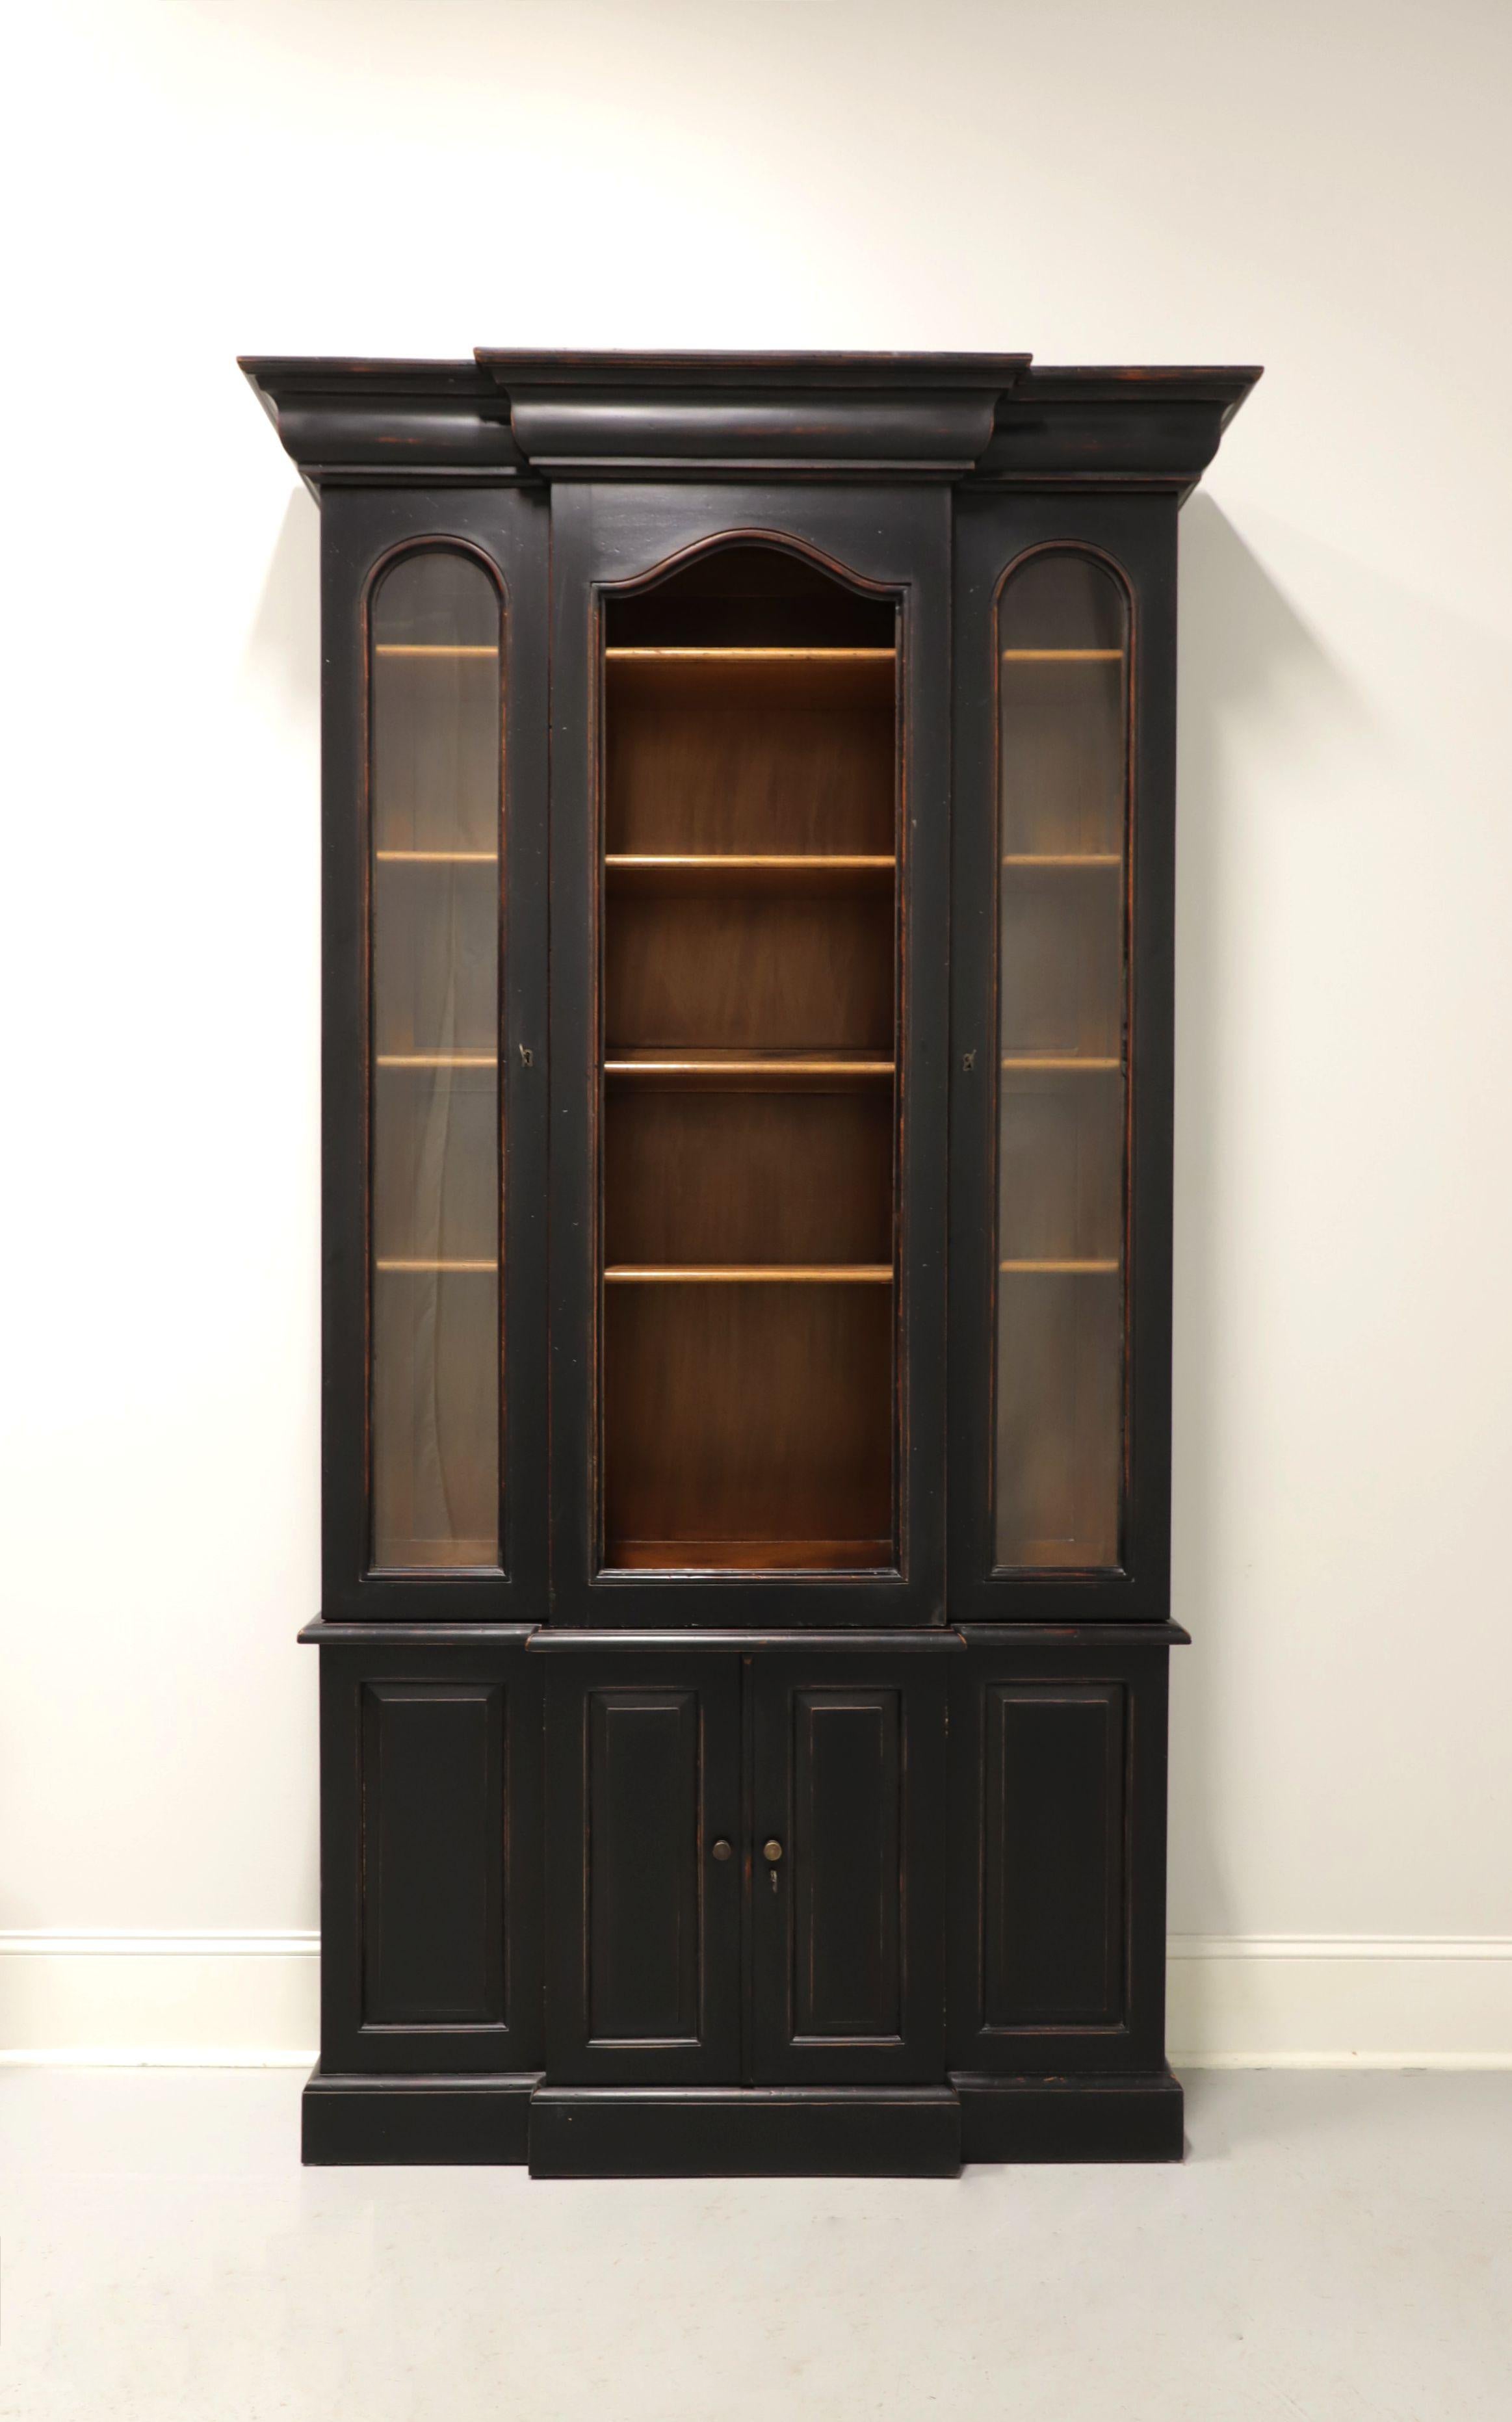 A Traditional style breakfront bookcase, unbranded. Hardwood with a distressed black finish, breakfront, crown molding to top and metal hardware. Upper cabinet features a center framed arched open area with four adjustable wood shelves; flanked by